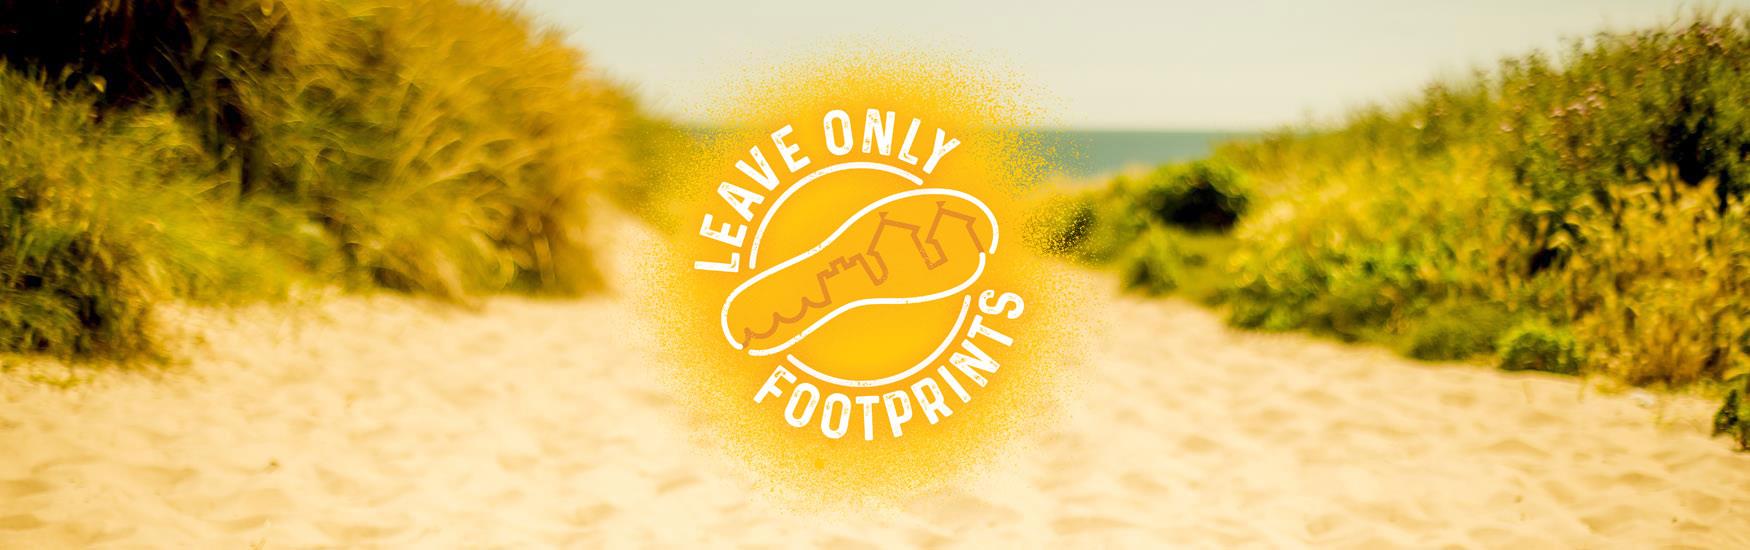 Sunny beach background with Leave only footprints logo in front